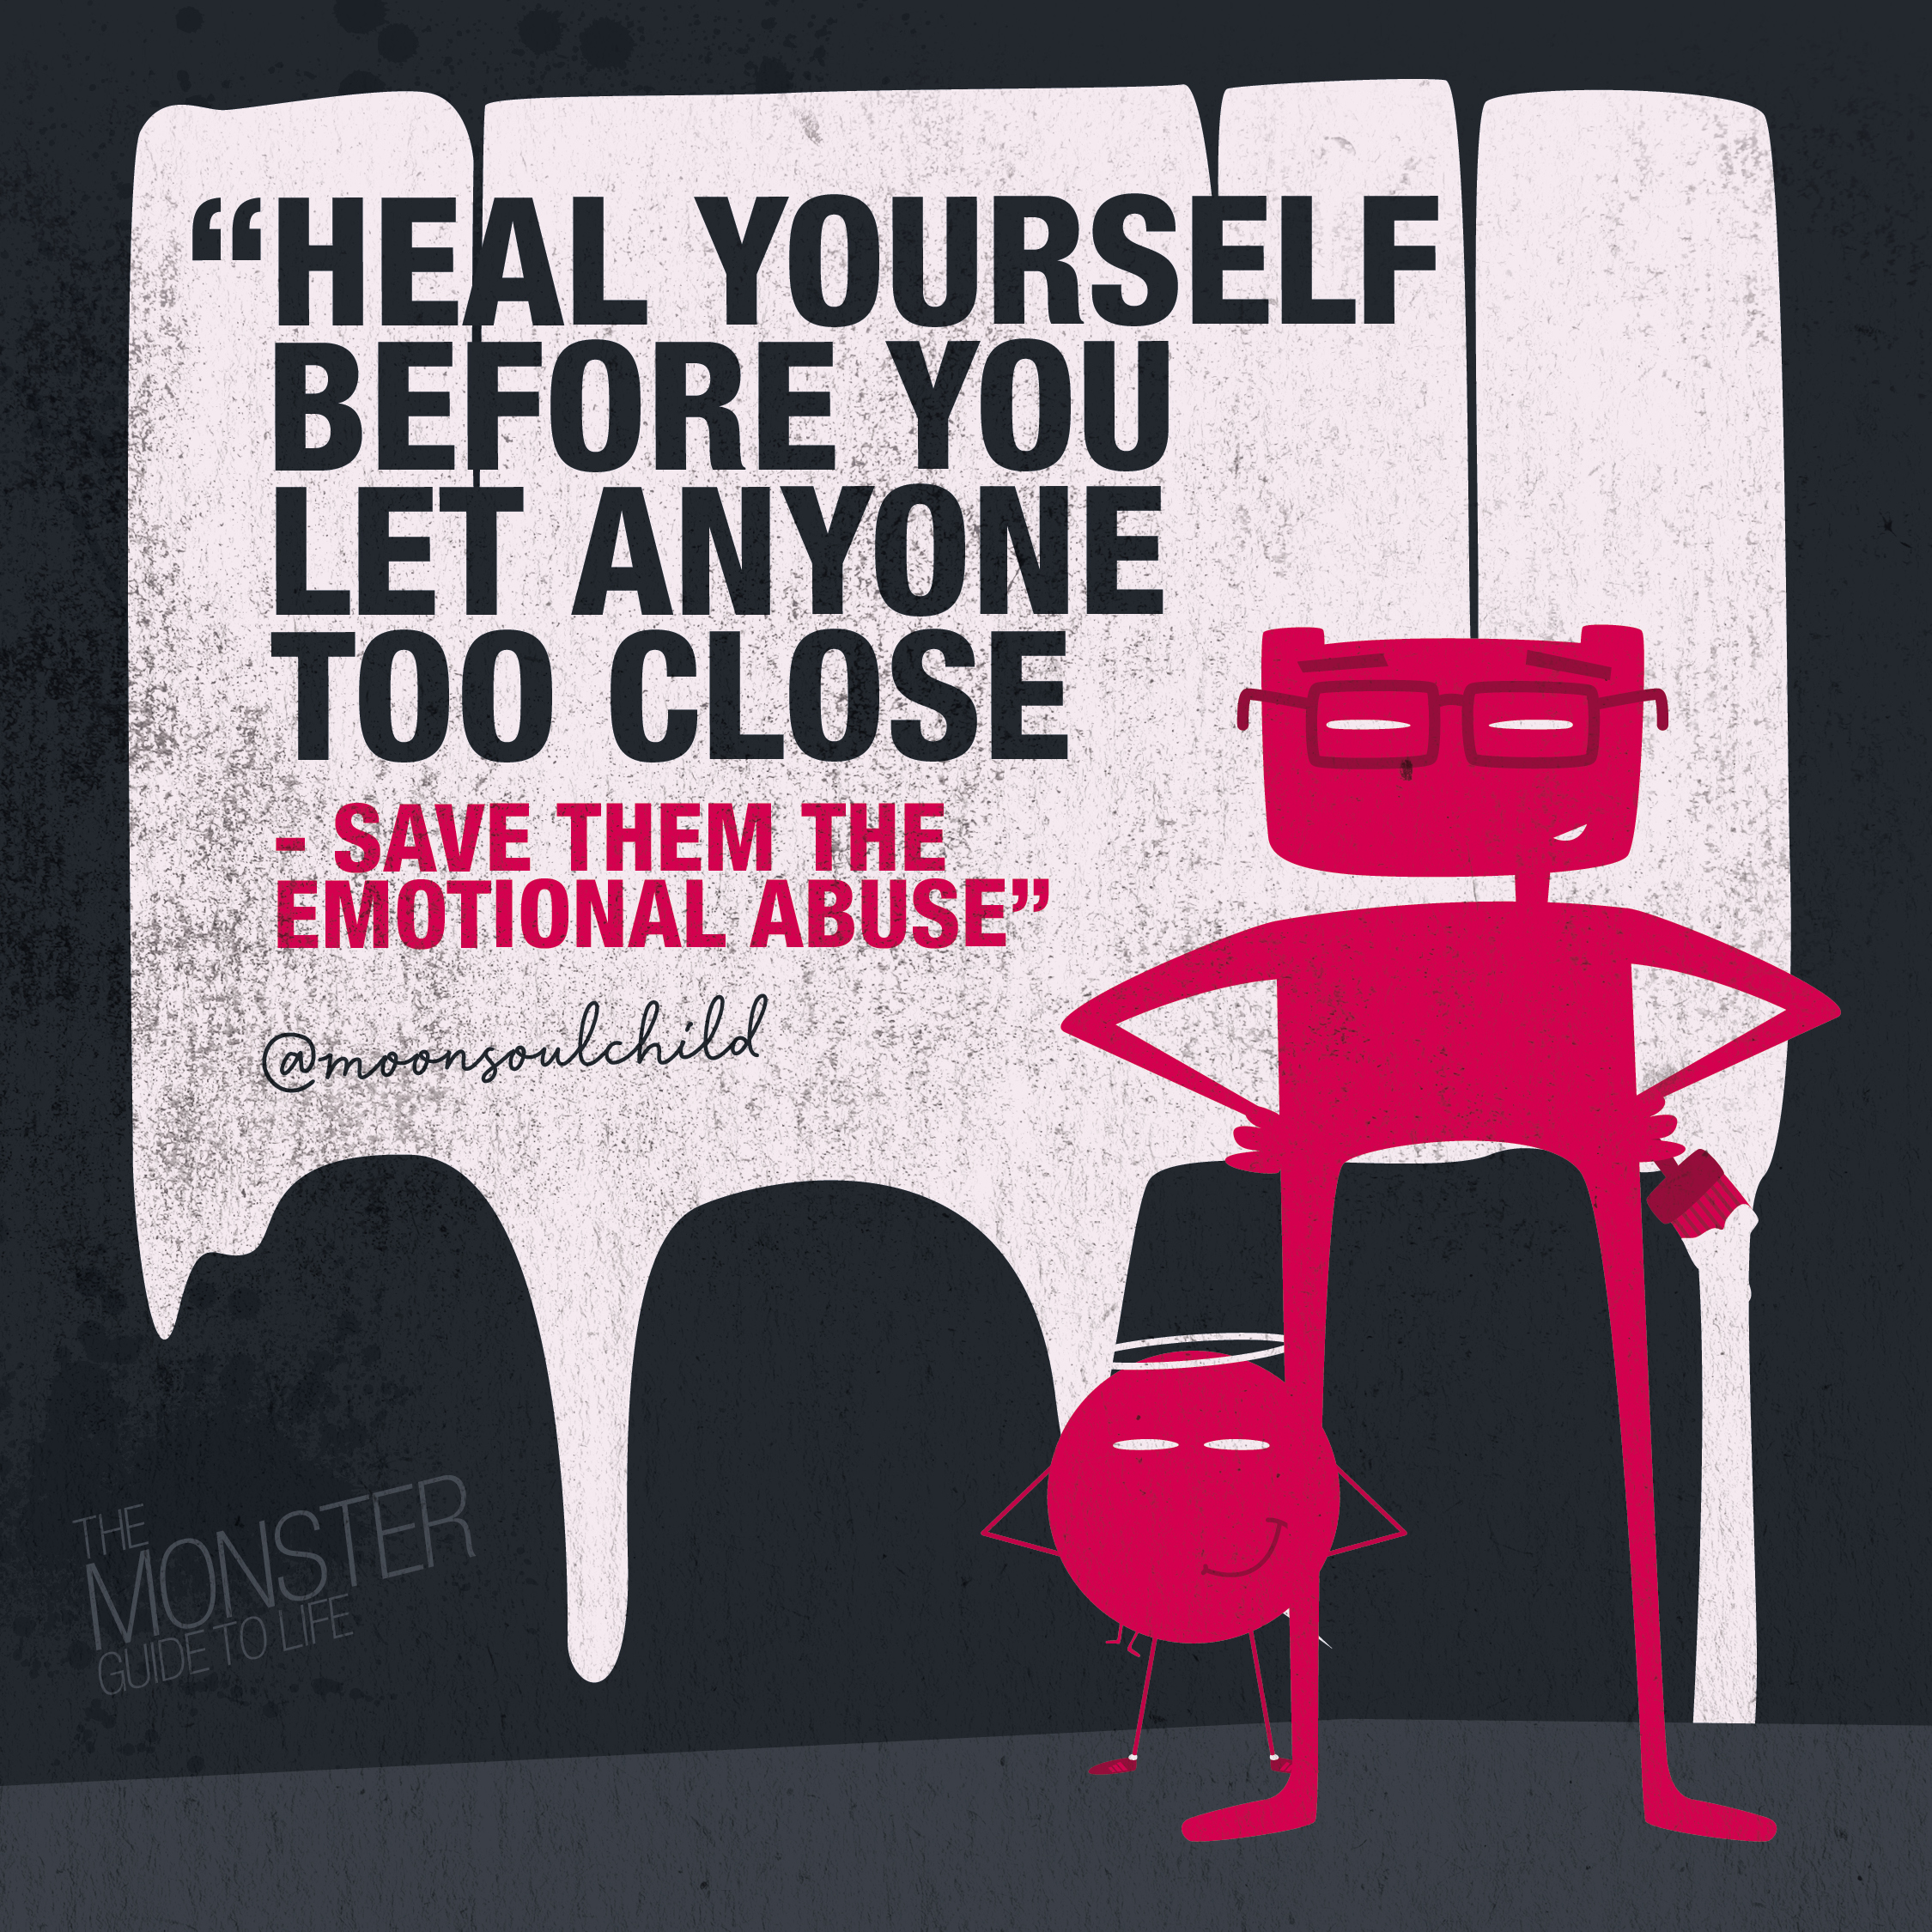 Heal yourself before you let anyone too close